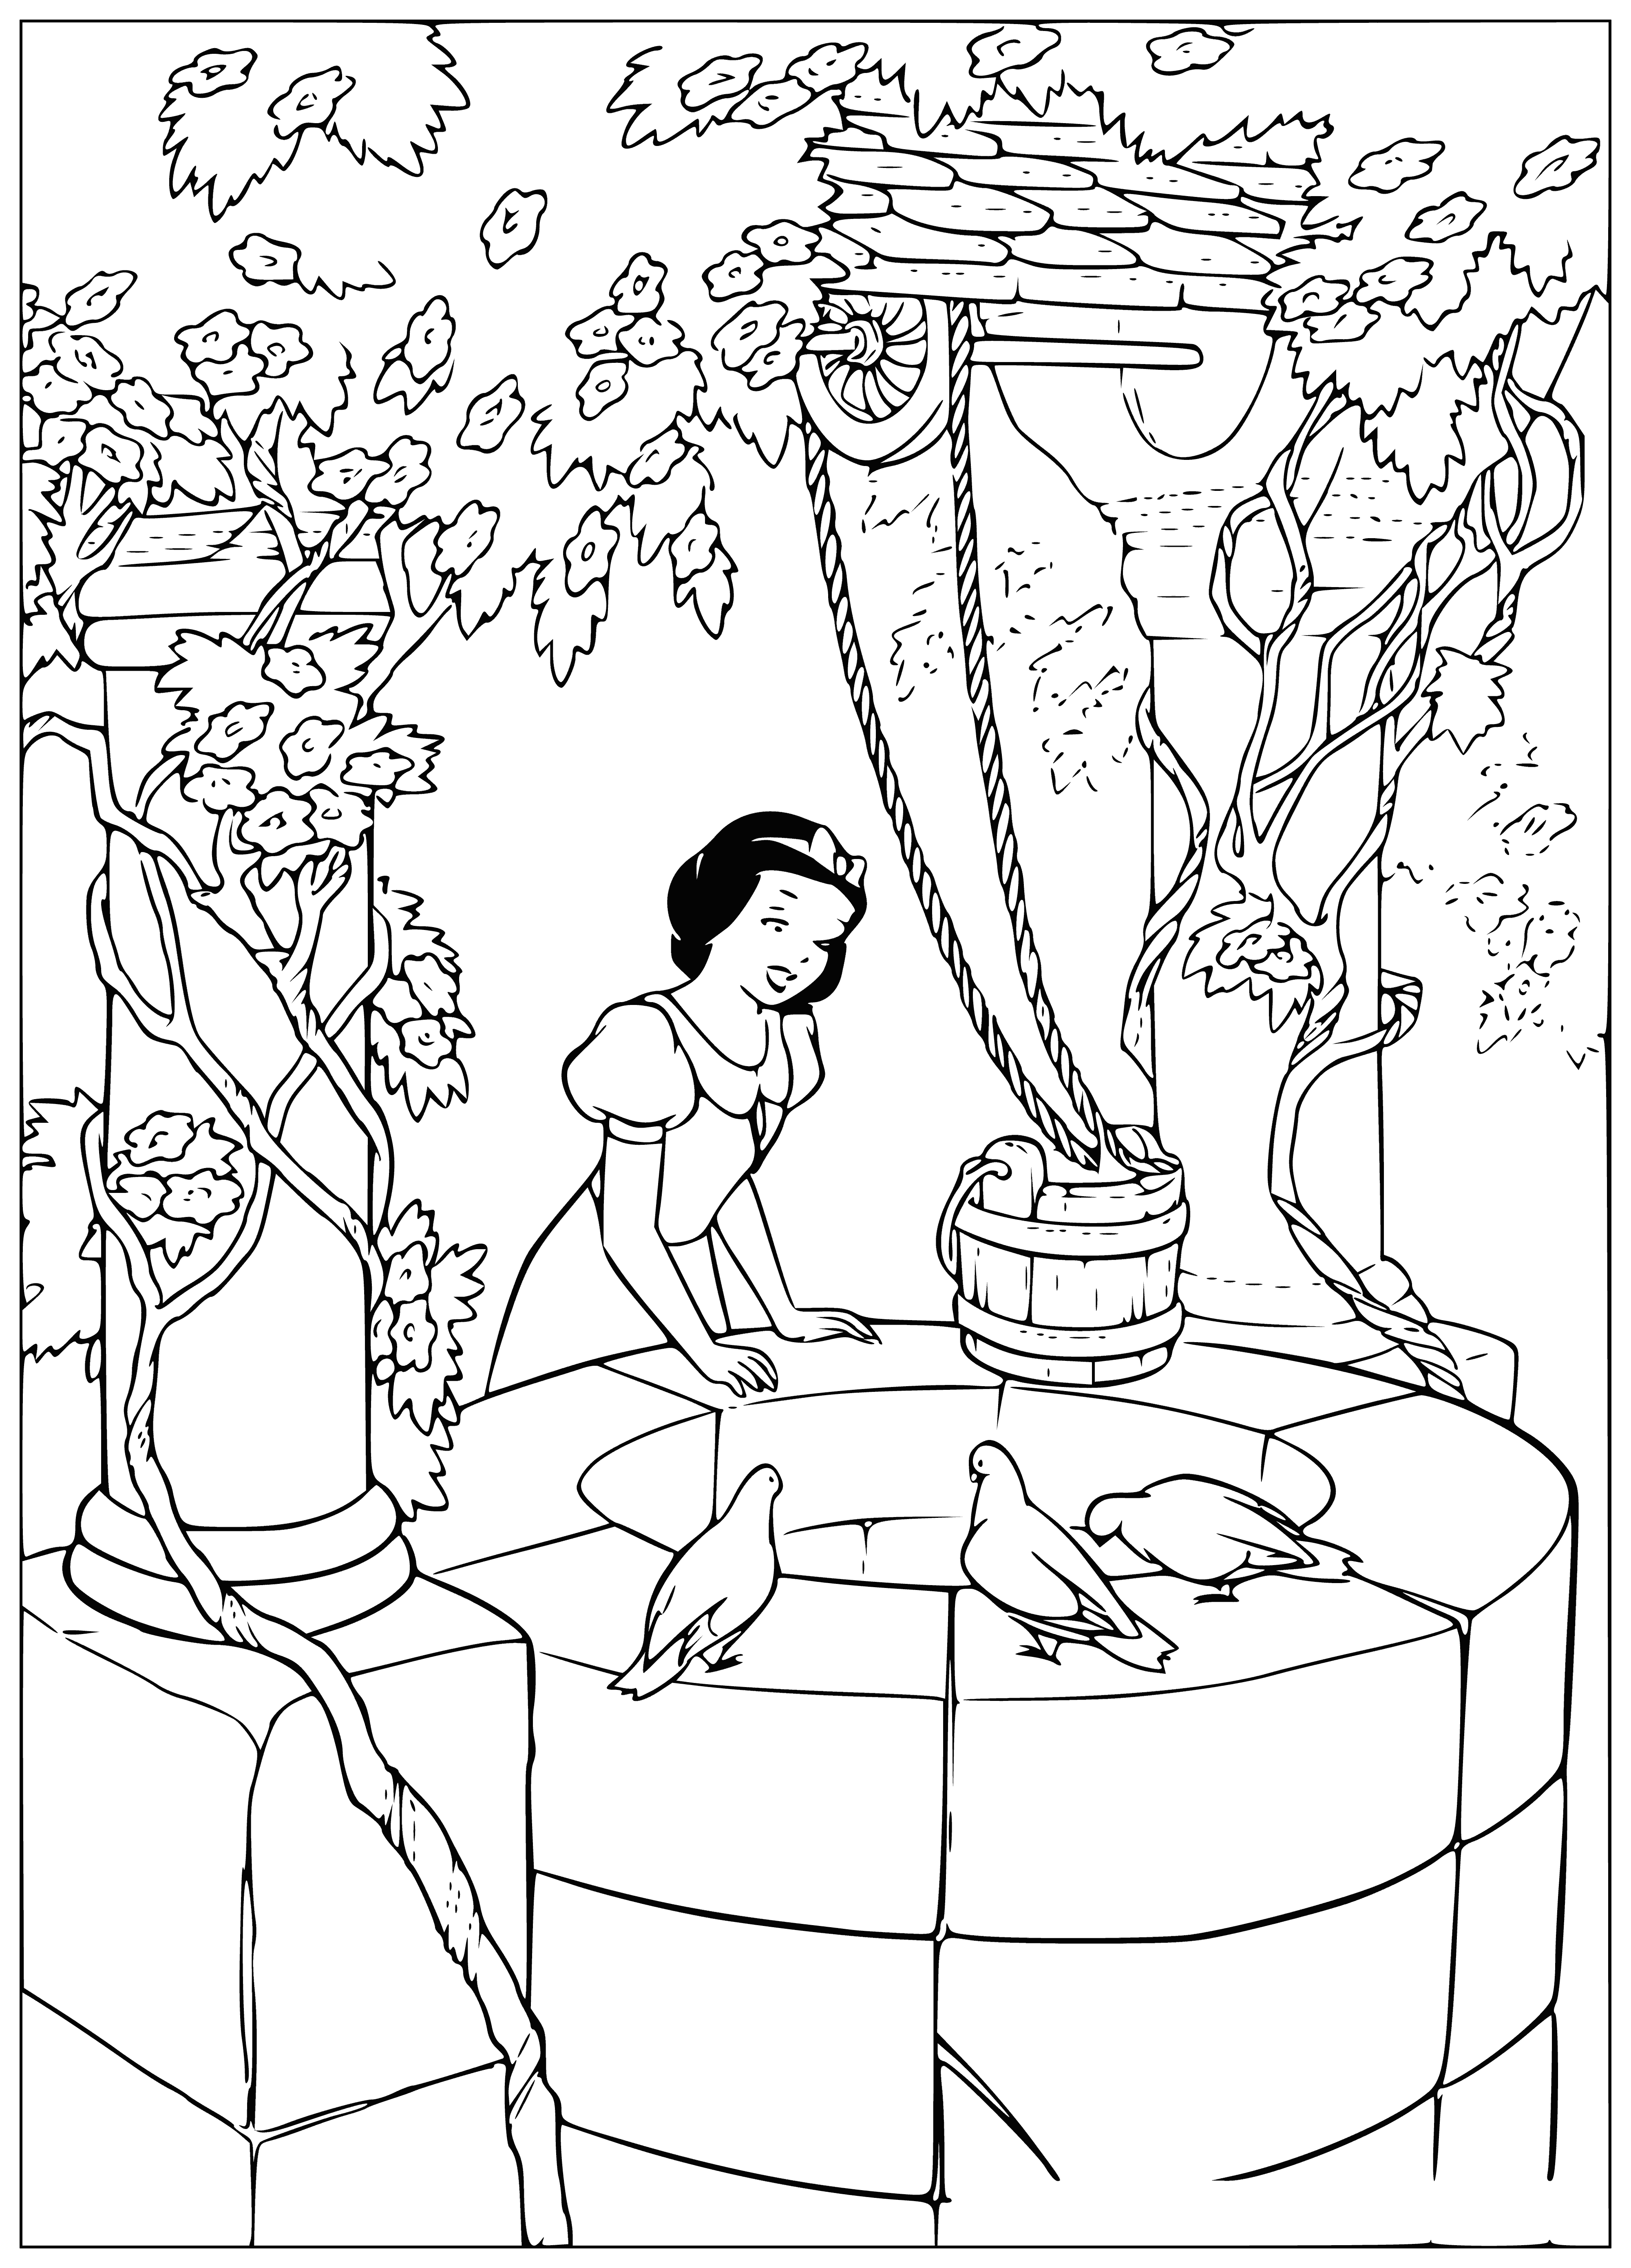 Snow white at the well coloring page